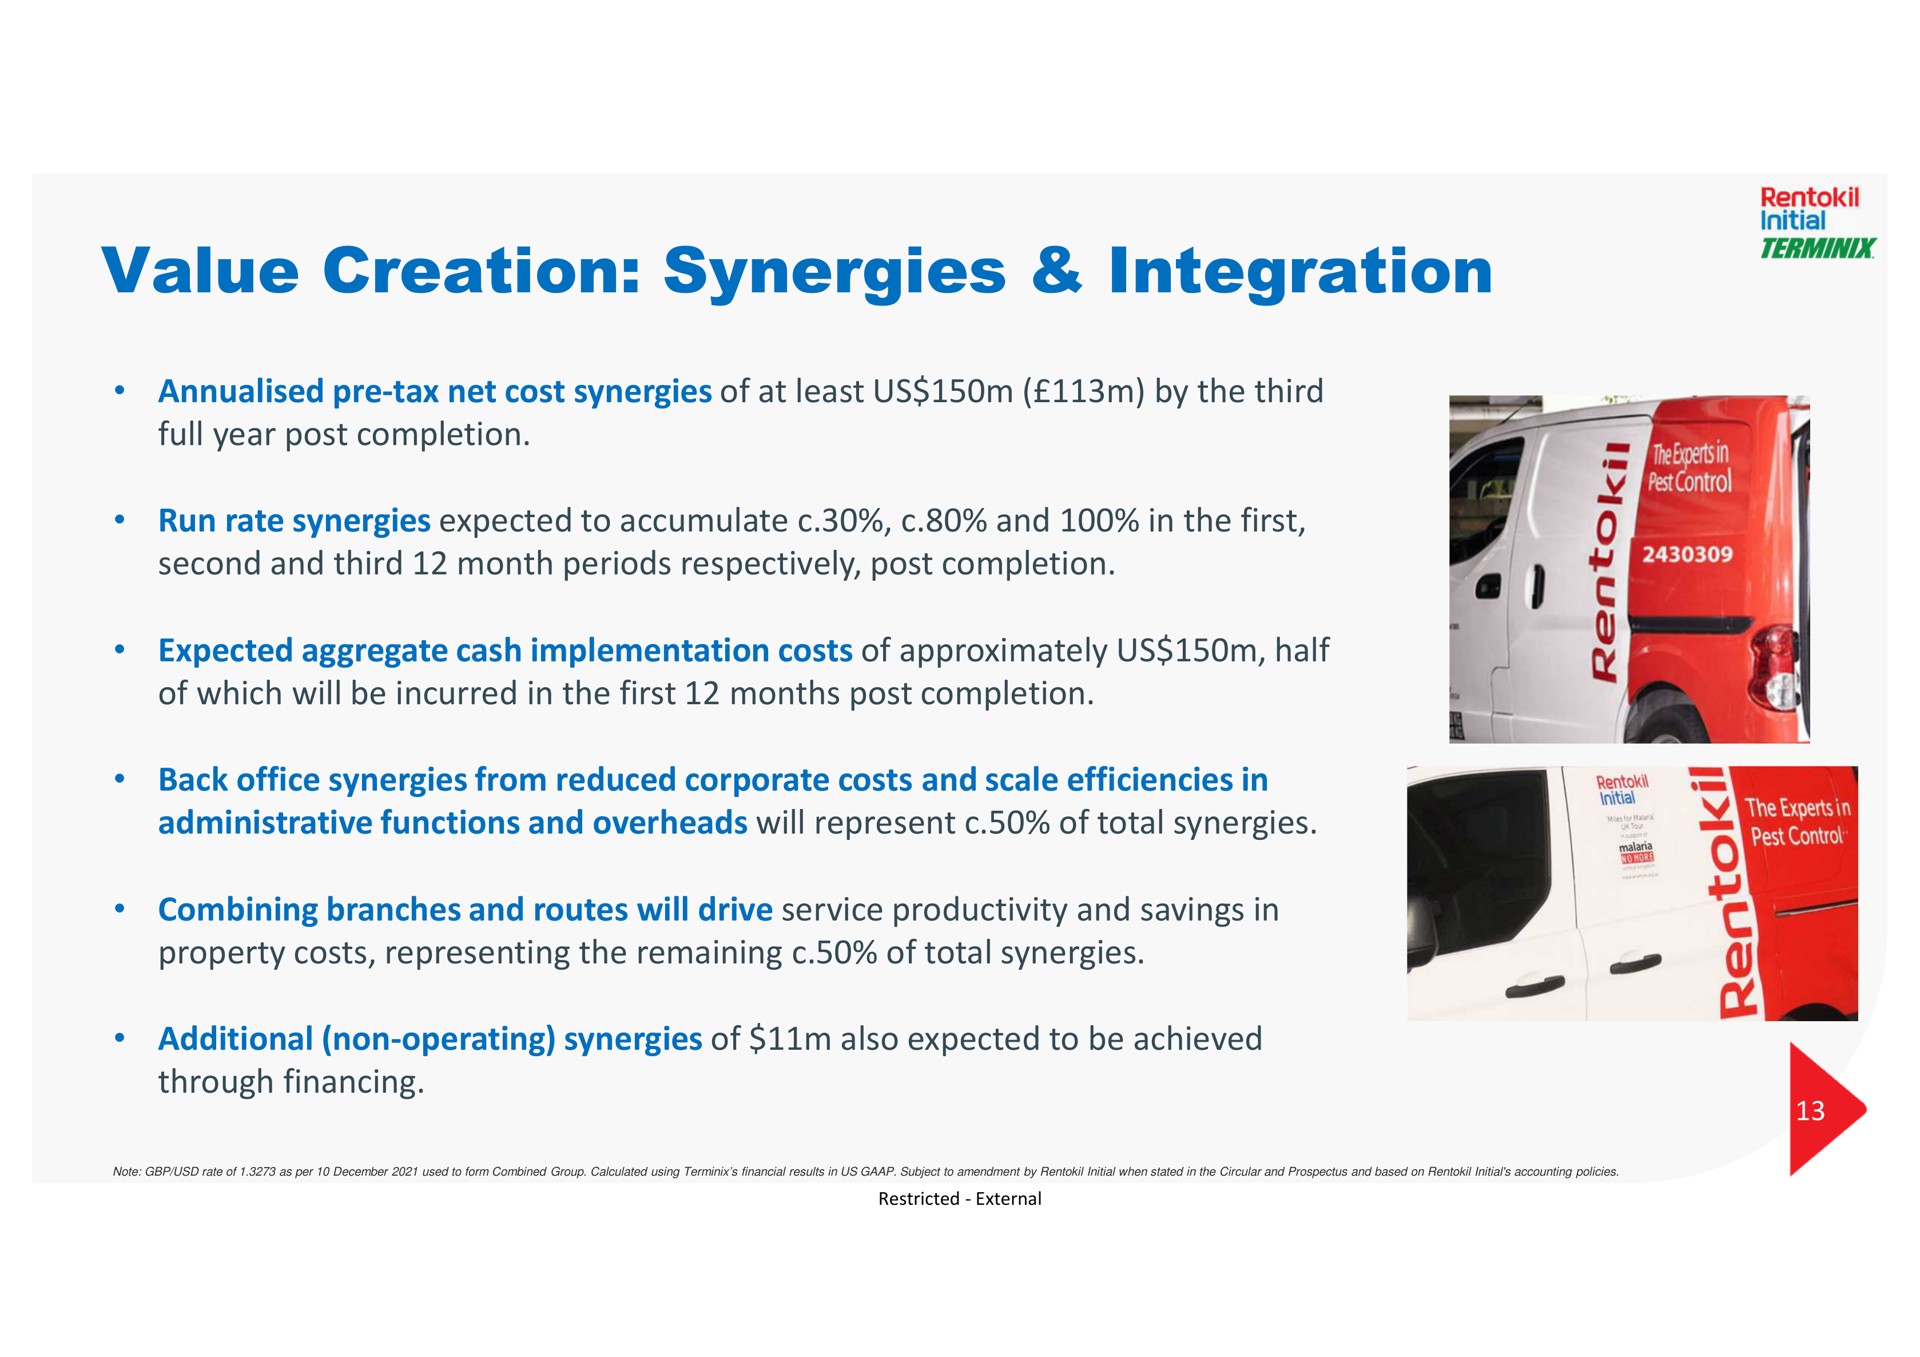 value creation synergies integration | Rentokil Initial